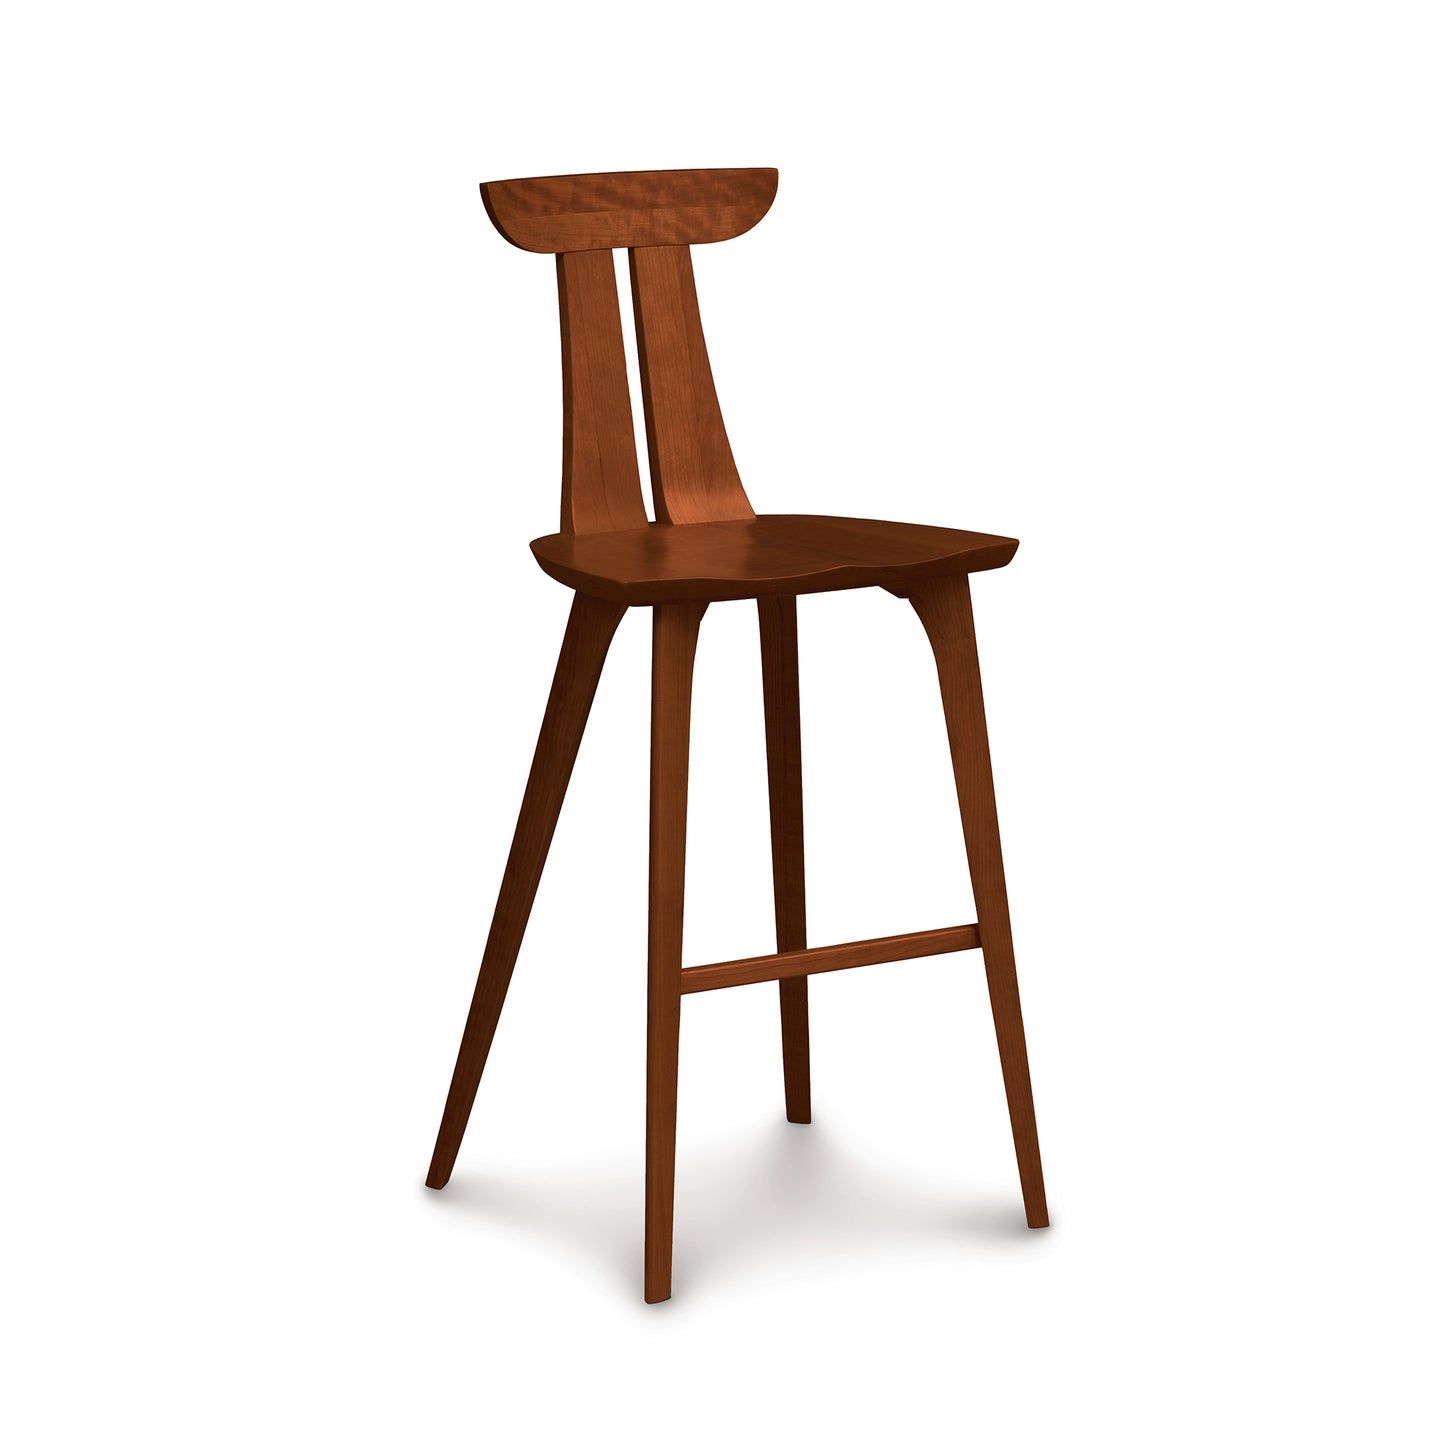 A Estelle Bar Stool by Copeland Furniture is featured in a mid-century modern design, isolated on a white background.